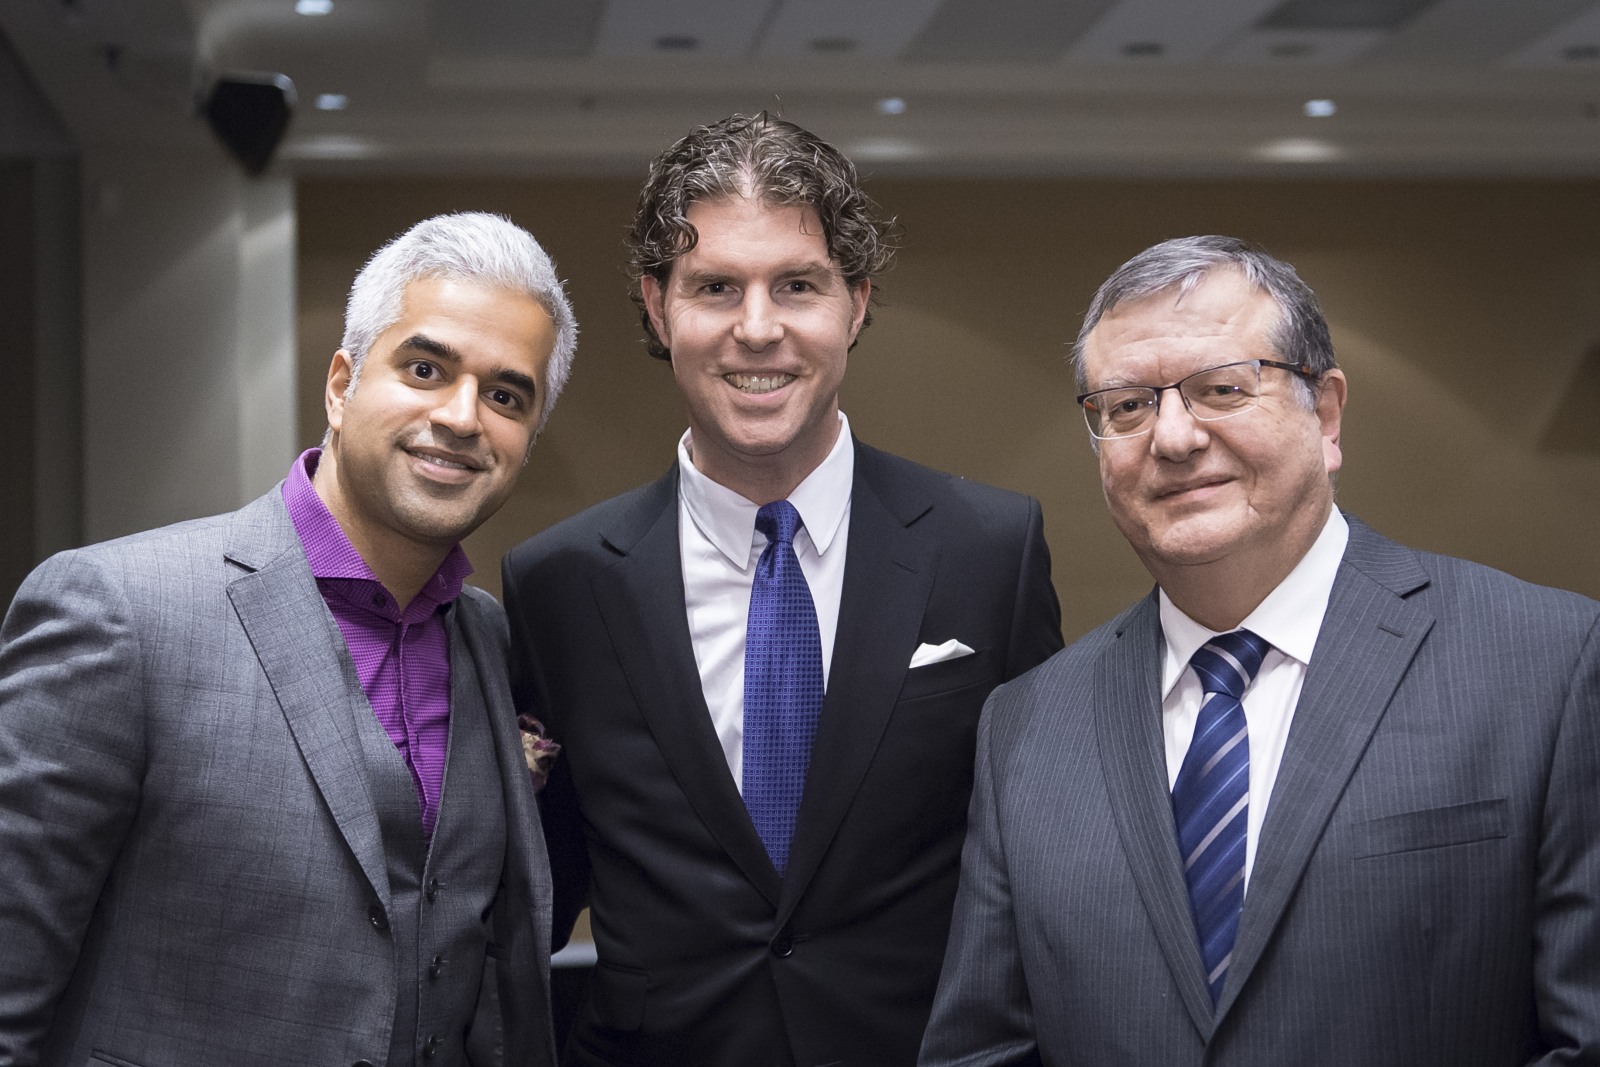 From left to right: BBA alumnus and co-host of Breakfast Television Vancouver, Riaz Meghji, Ryan Beedie, and Ali Dastmalchian, Dean of the Beedie School of Business. 